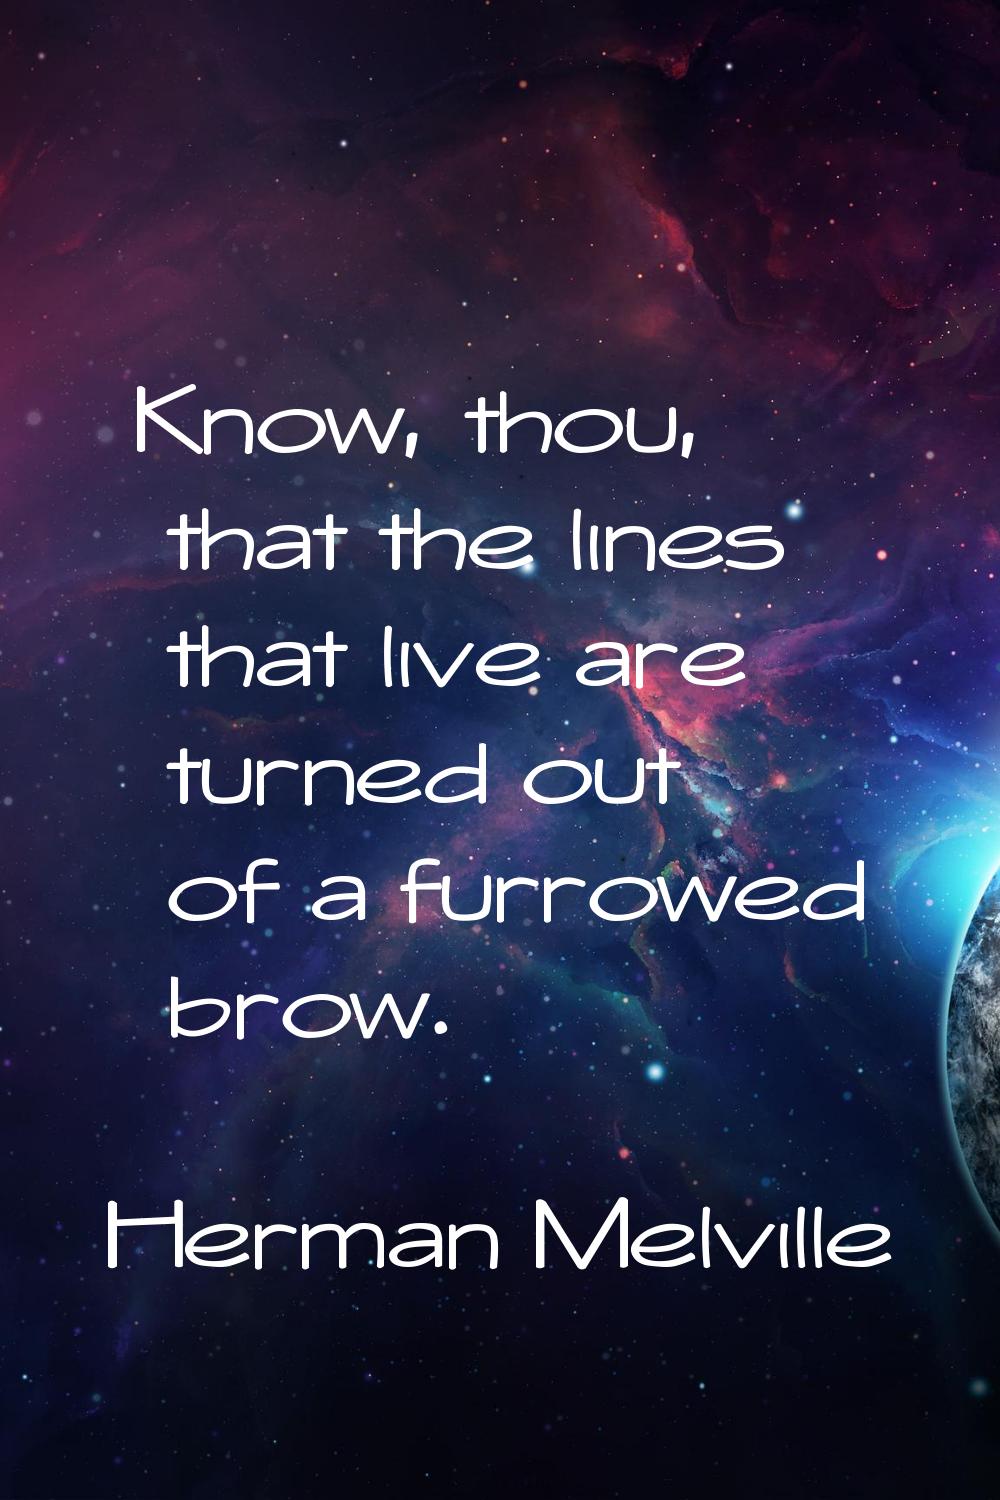 Know, thou, that the lines that live are turned out of a furrowed brow.